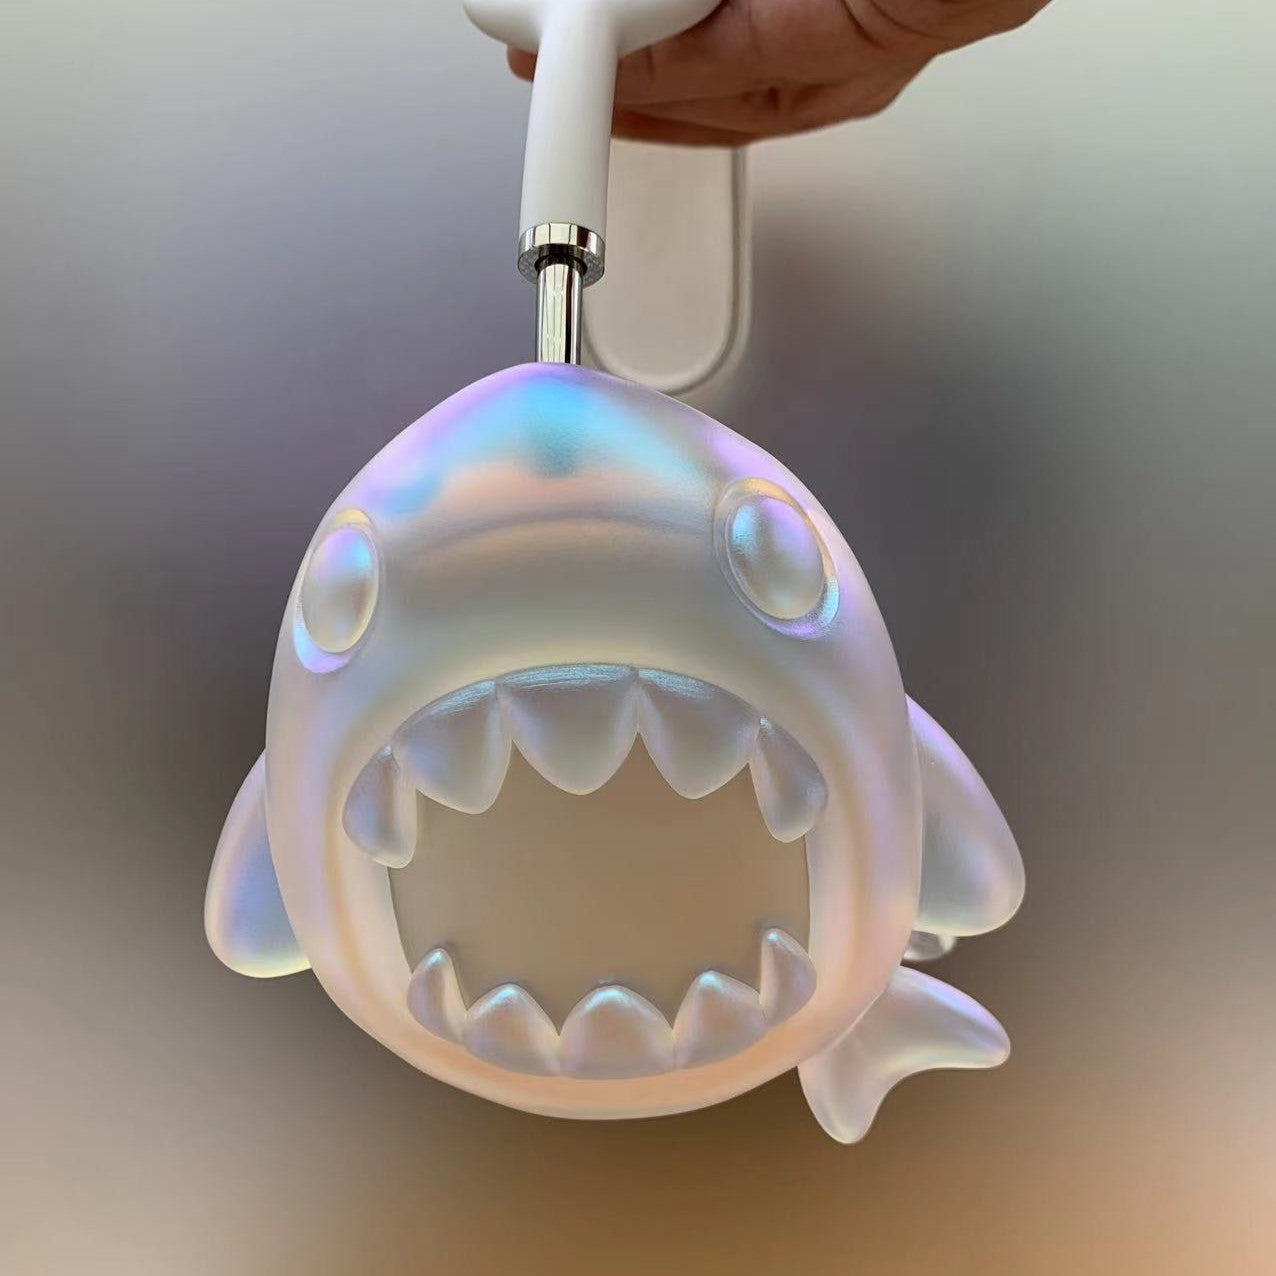 Baby shark -  for AirPods Max - Eri Verse